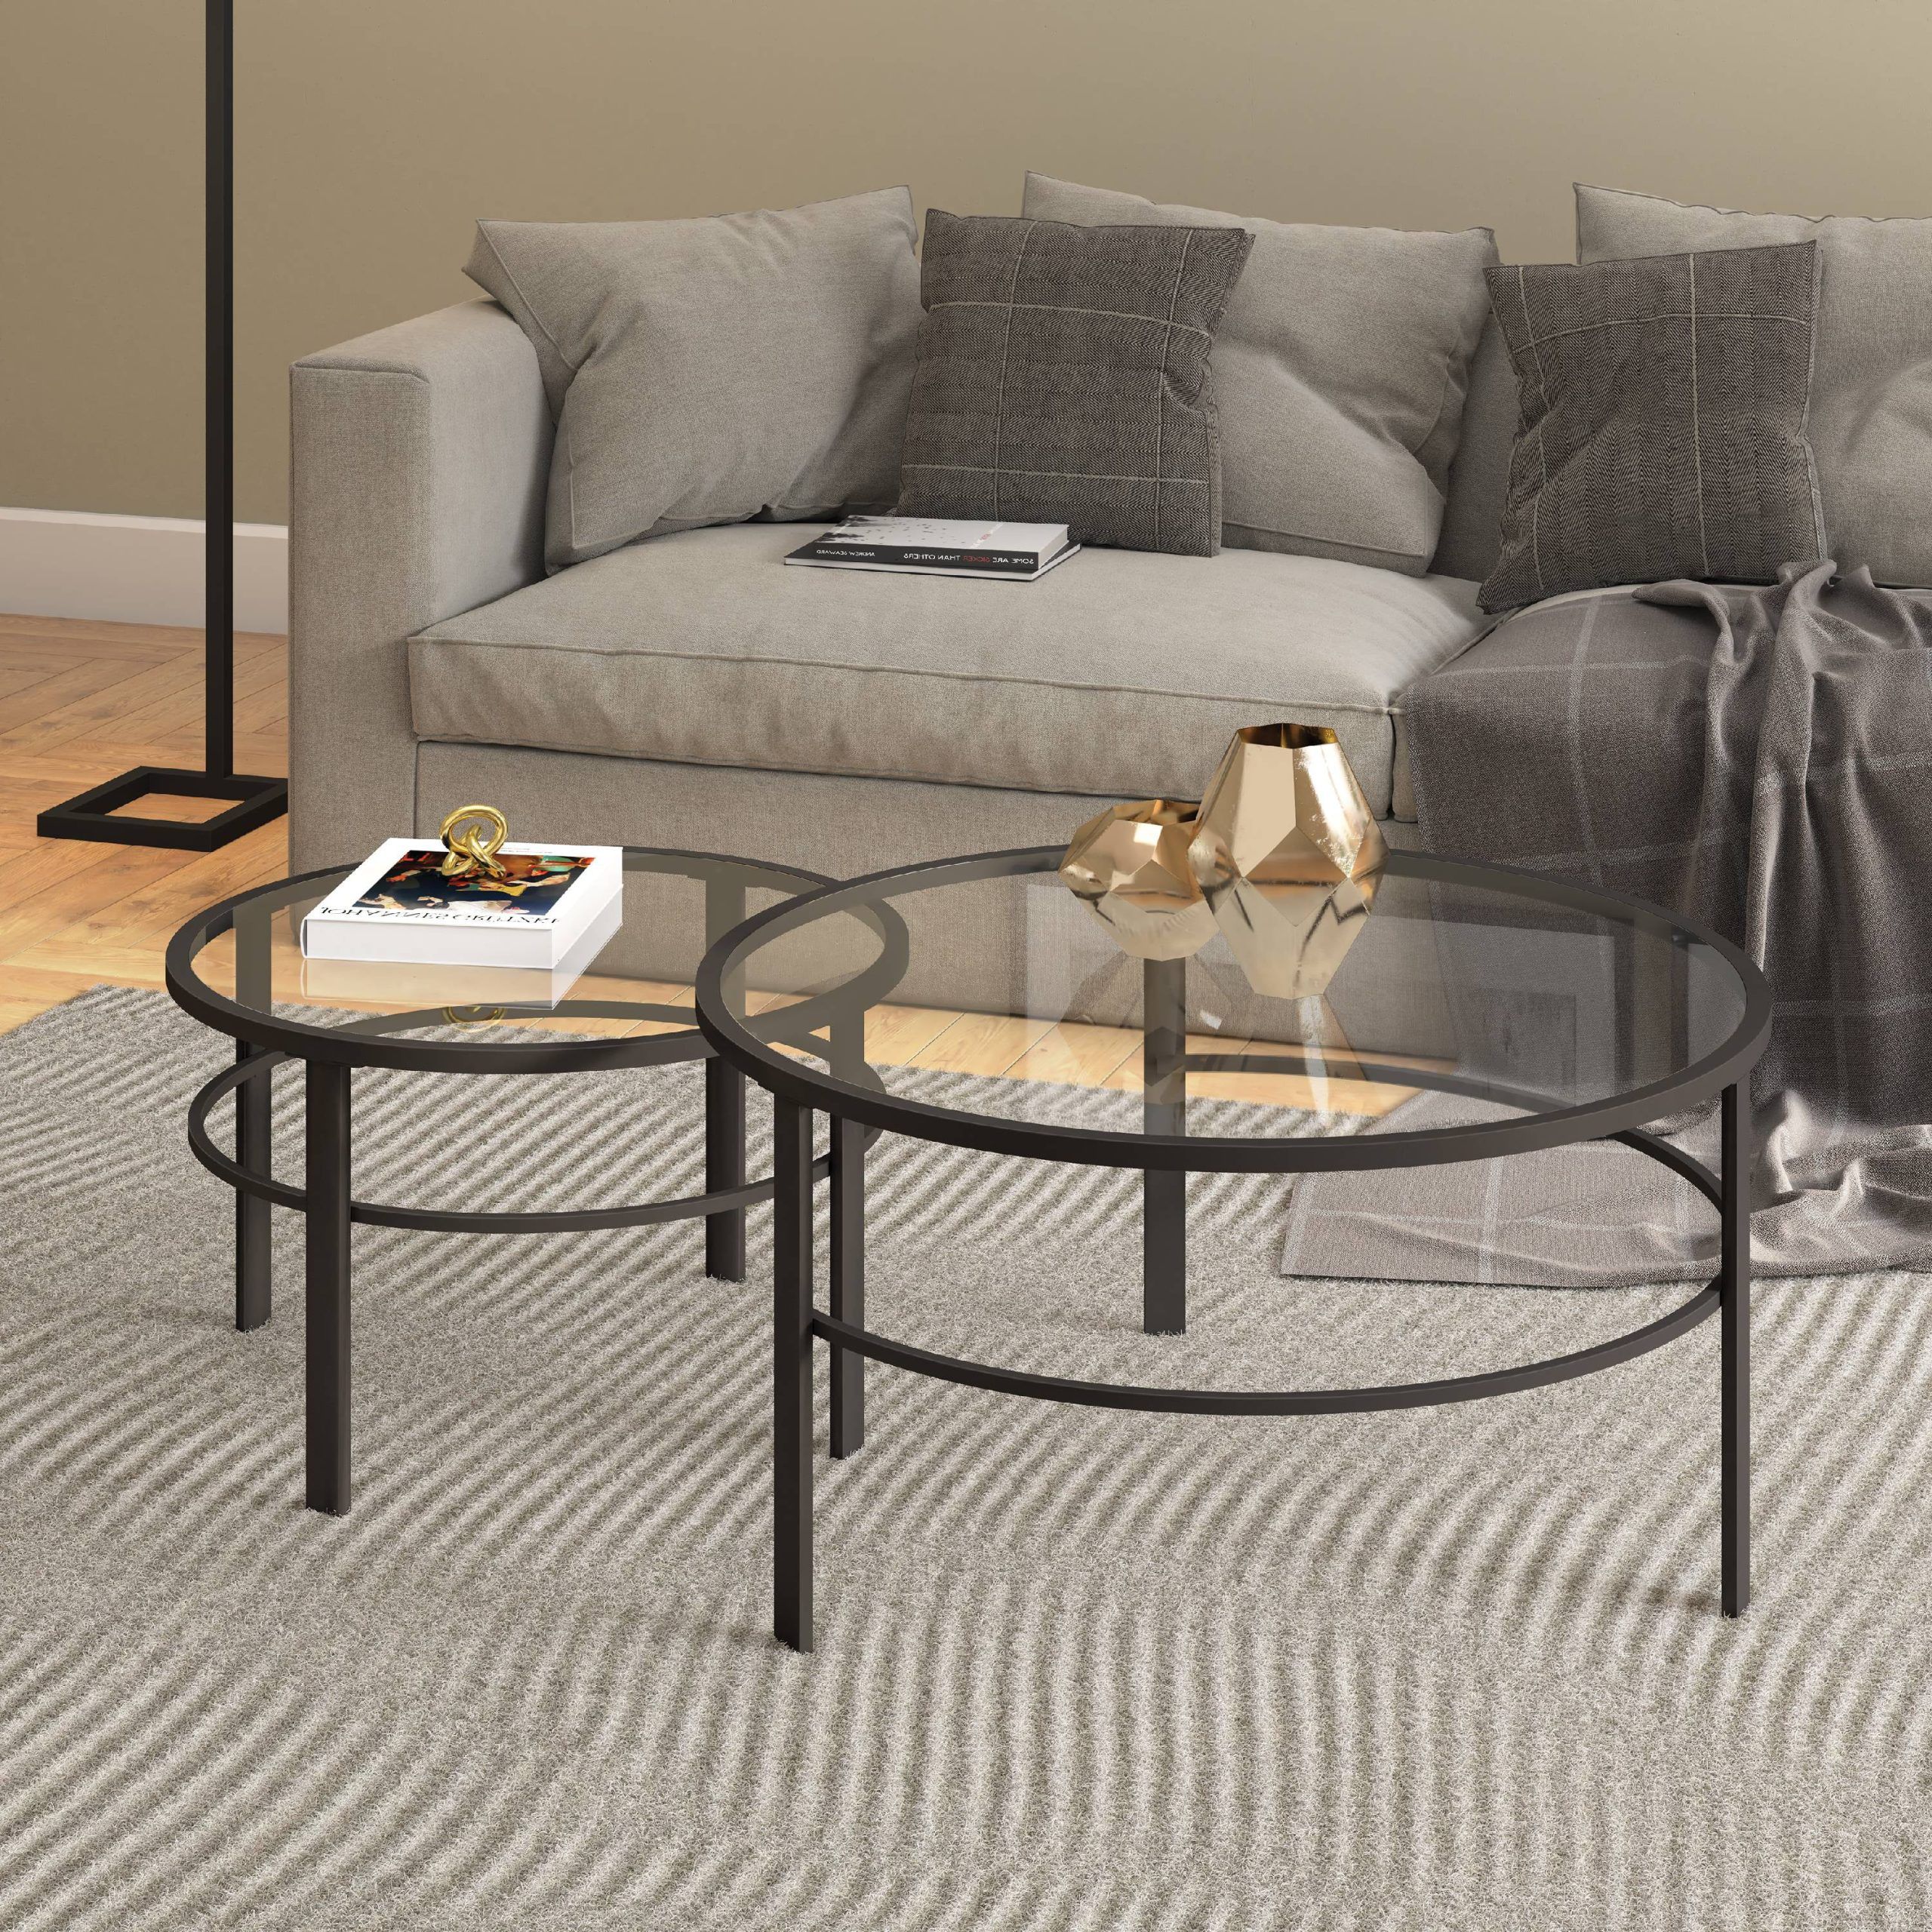 Most Popular Modern Nesting Coffee Tables Pertaining To Evelyn&zoe Contemporary Nesting Coffee Table Set With Glass Top (View 4 of 15)